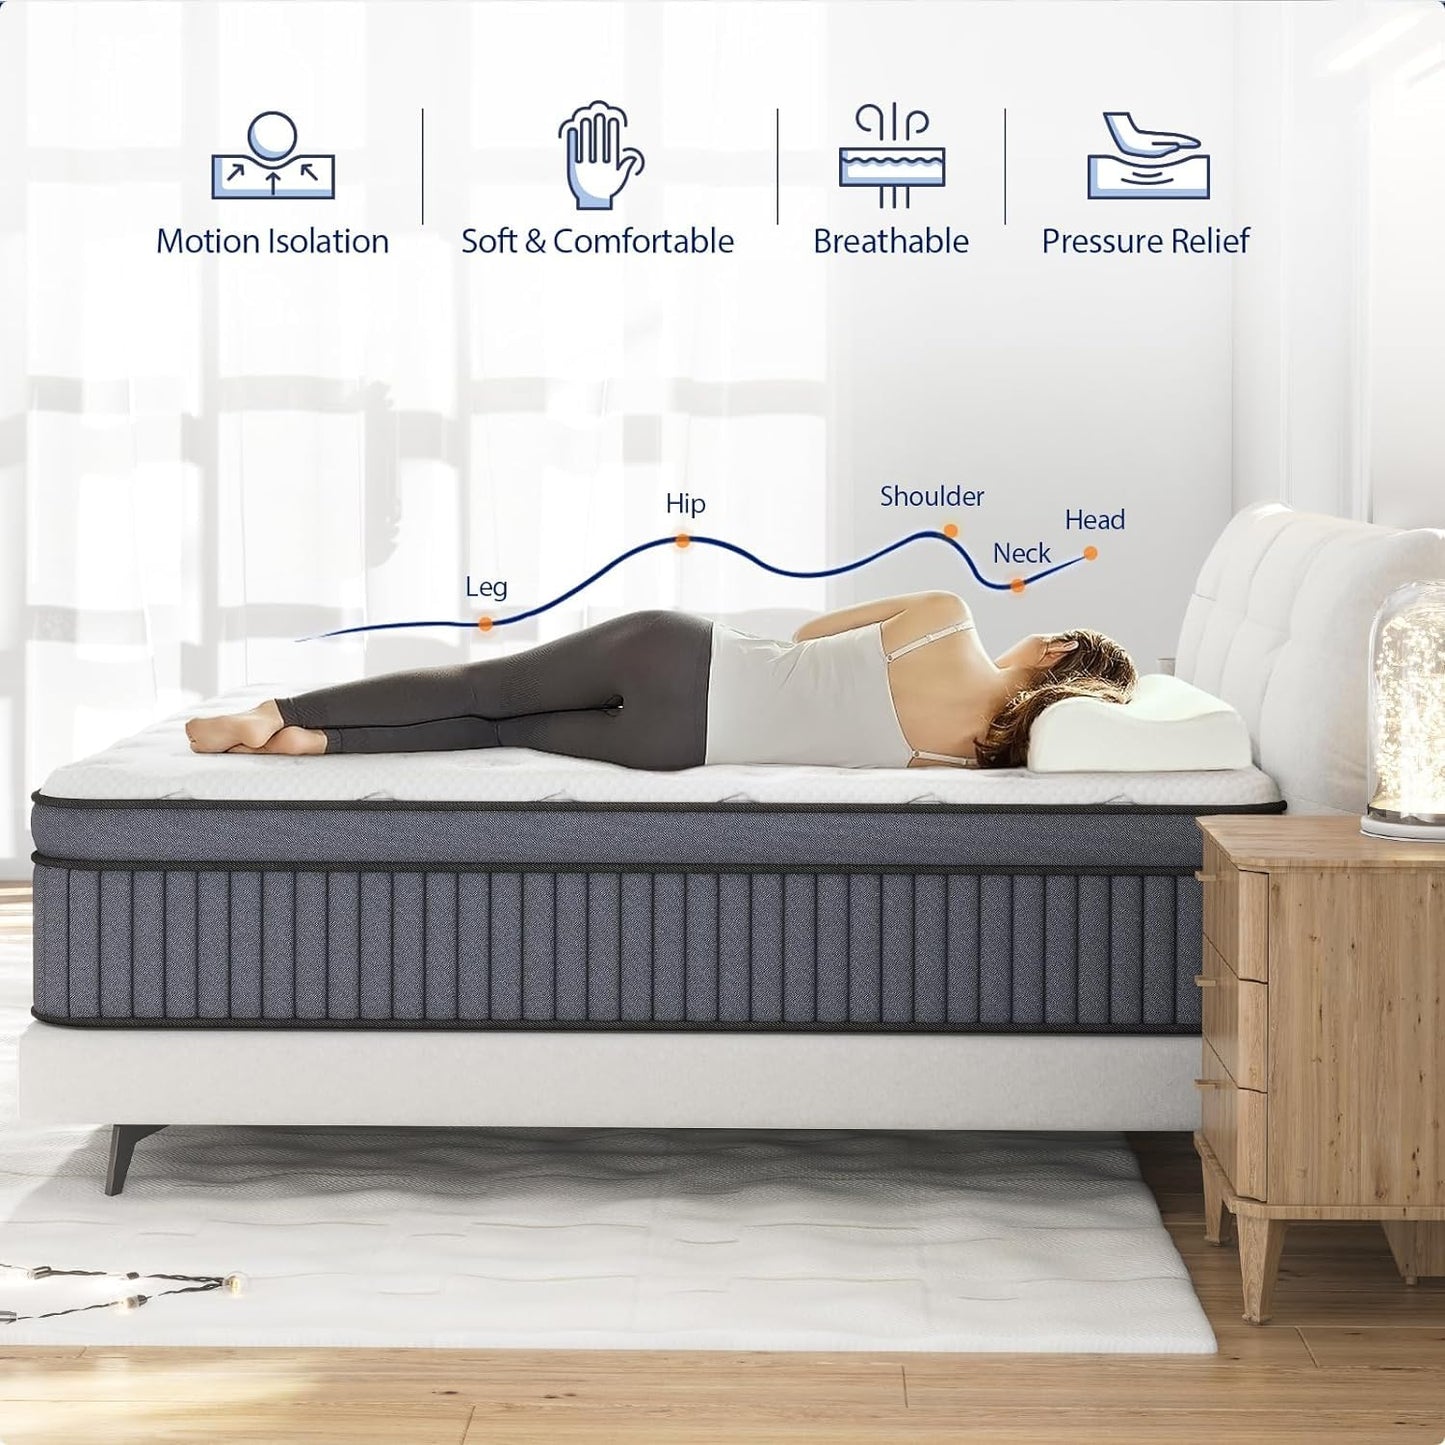 EEN EEN SLEEP California King Mattress - Upgrade Strengthen - 12 Inch Hybrid Cal King Mattress in a Box, Mattress King Size with Memory Foam and Independent Pocket Springs, Strong Edge Support, Firm